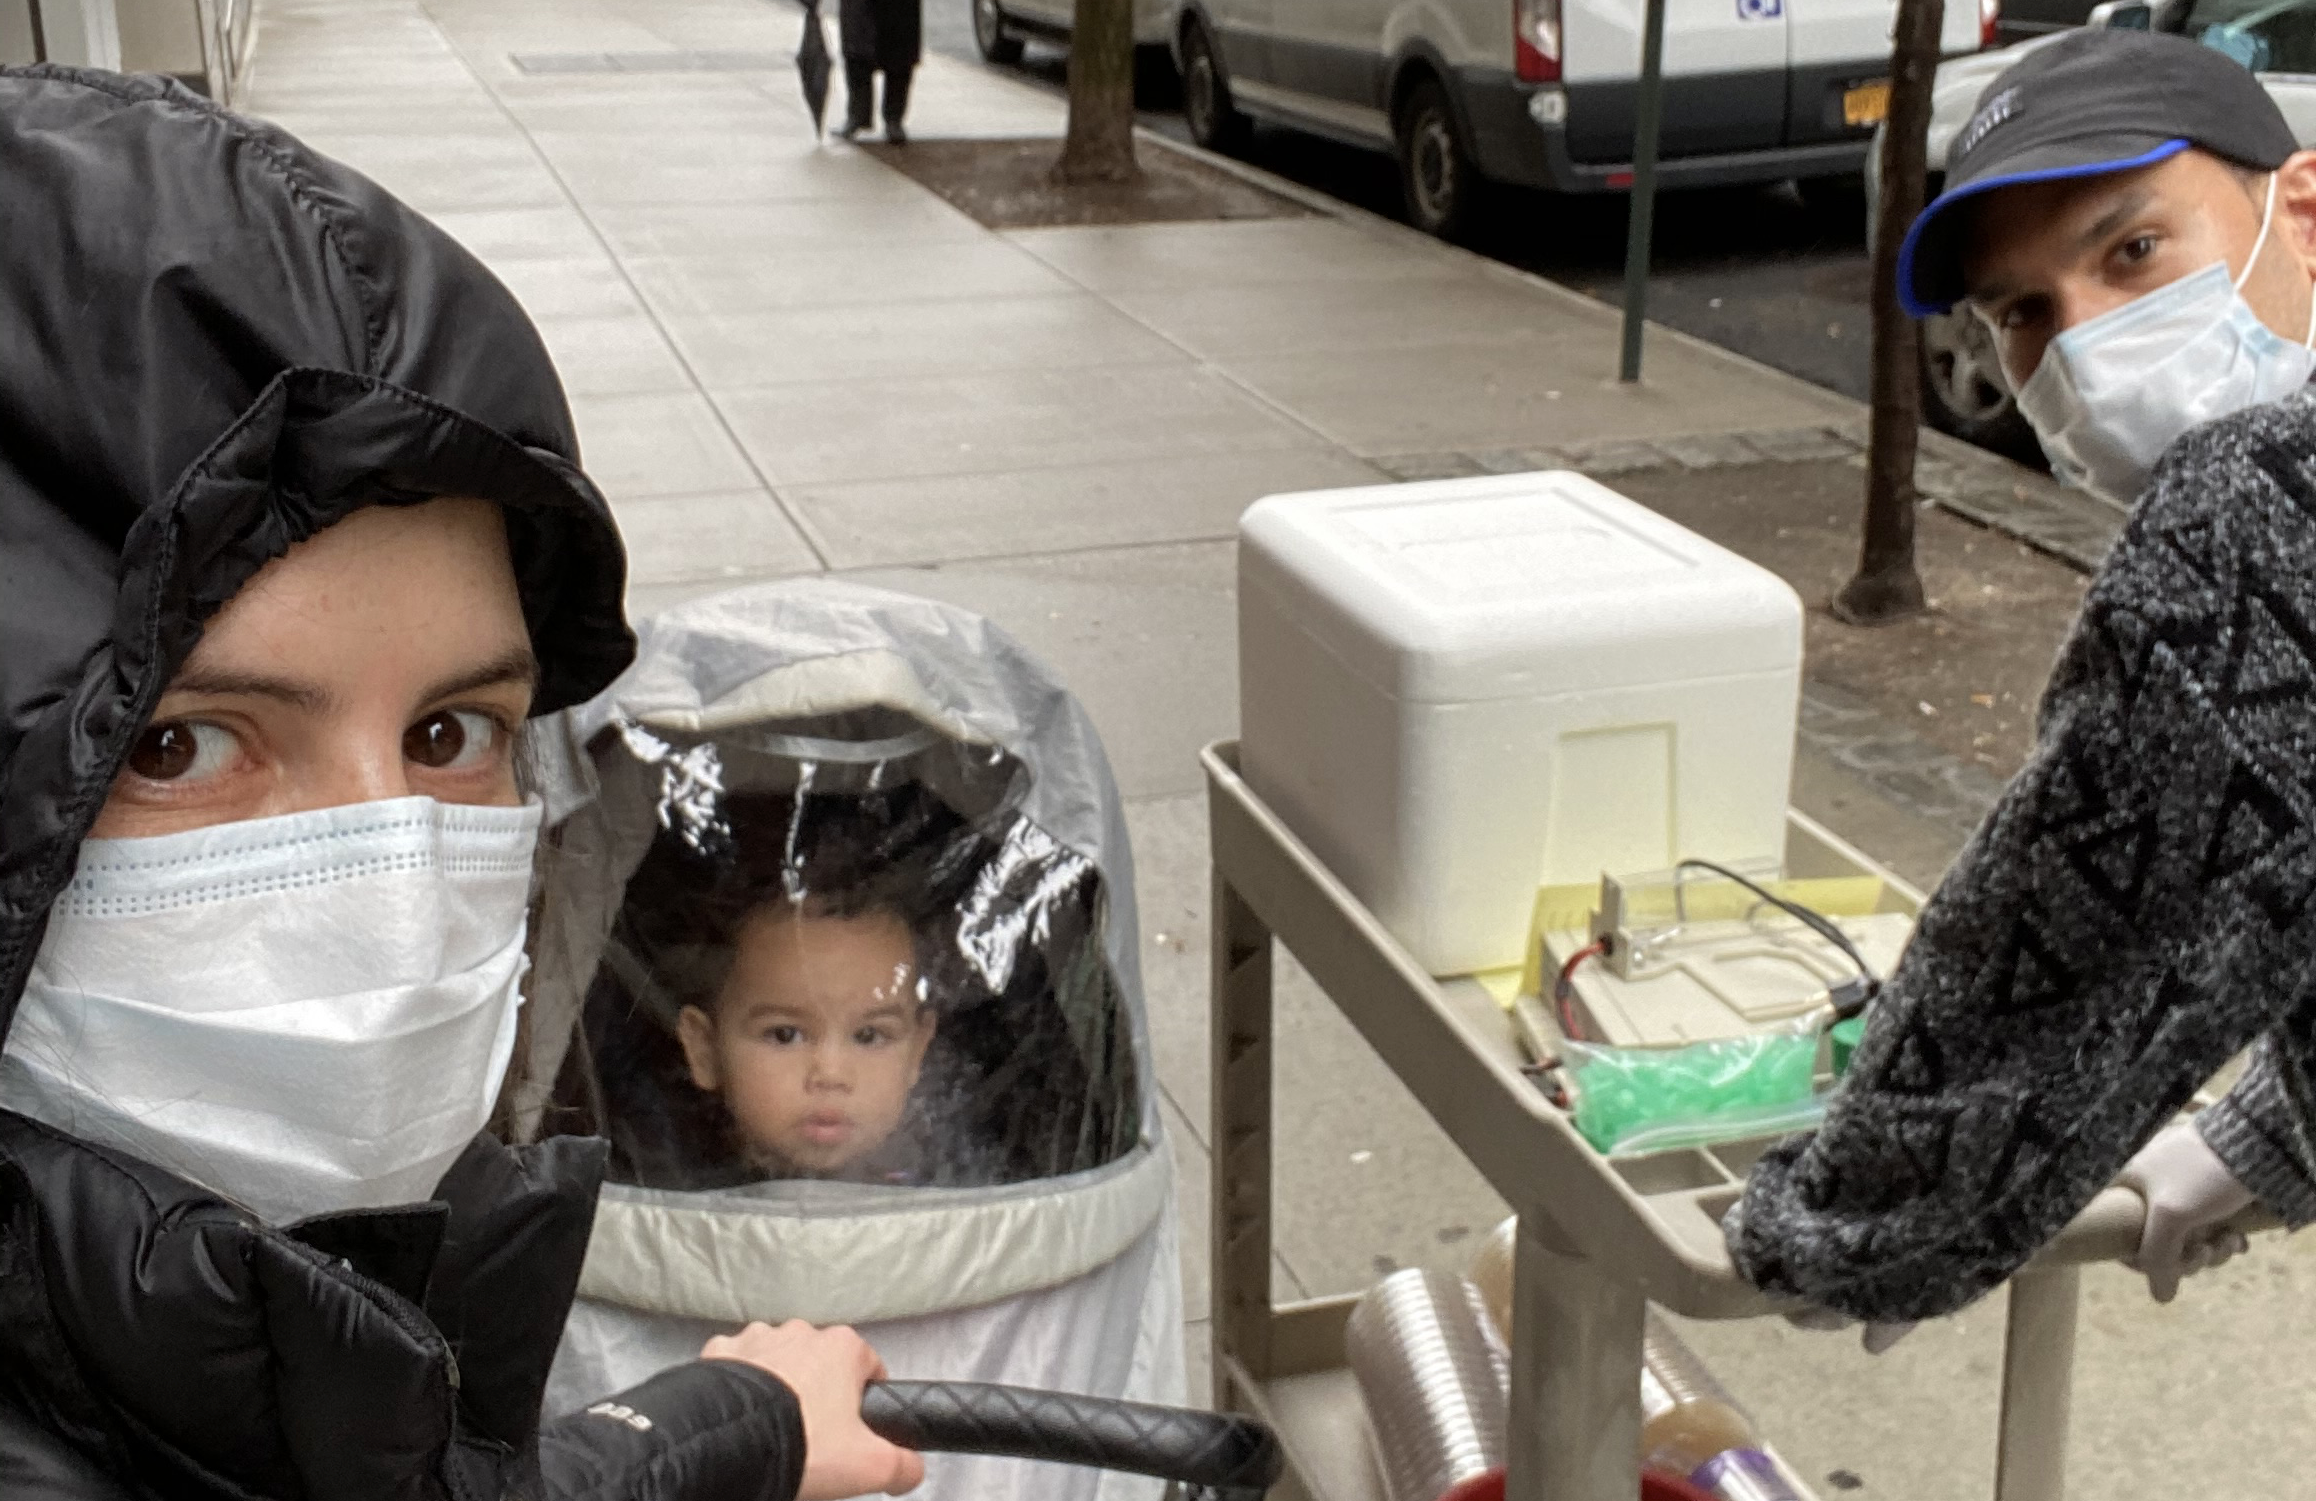 Dr. Sánchez-Rivera and Dr. Soto-Feliciano steering a cart of supplies along with their toddler in a stroller down East 68th Street.